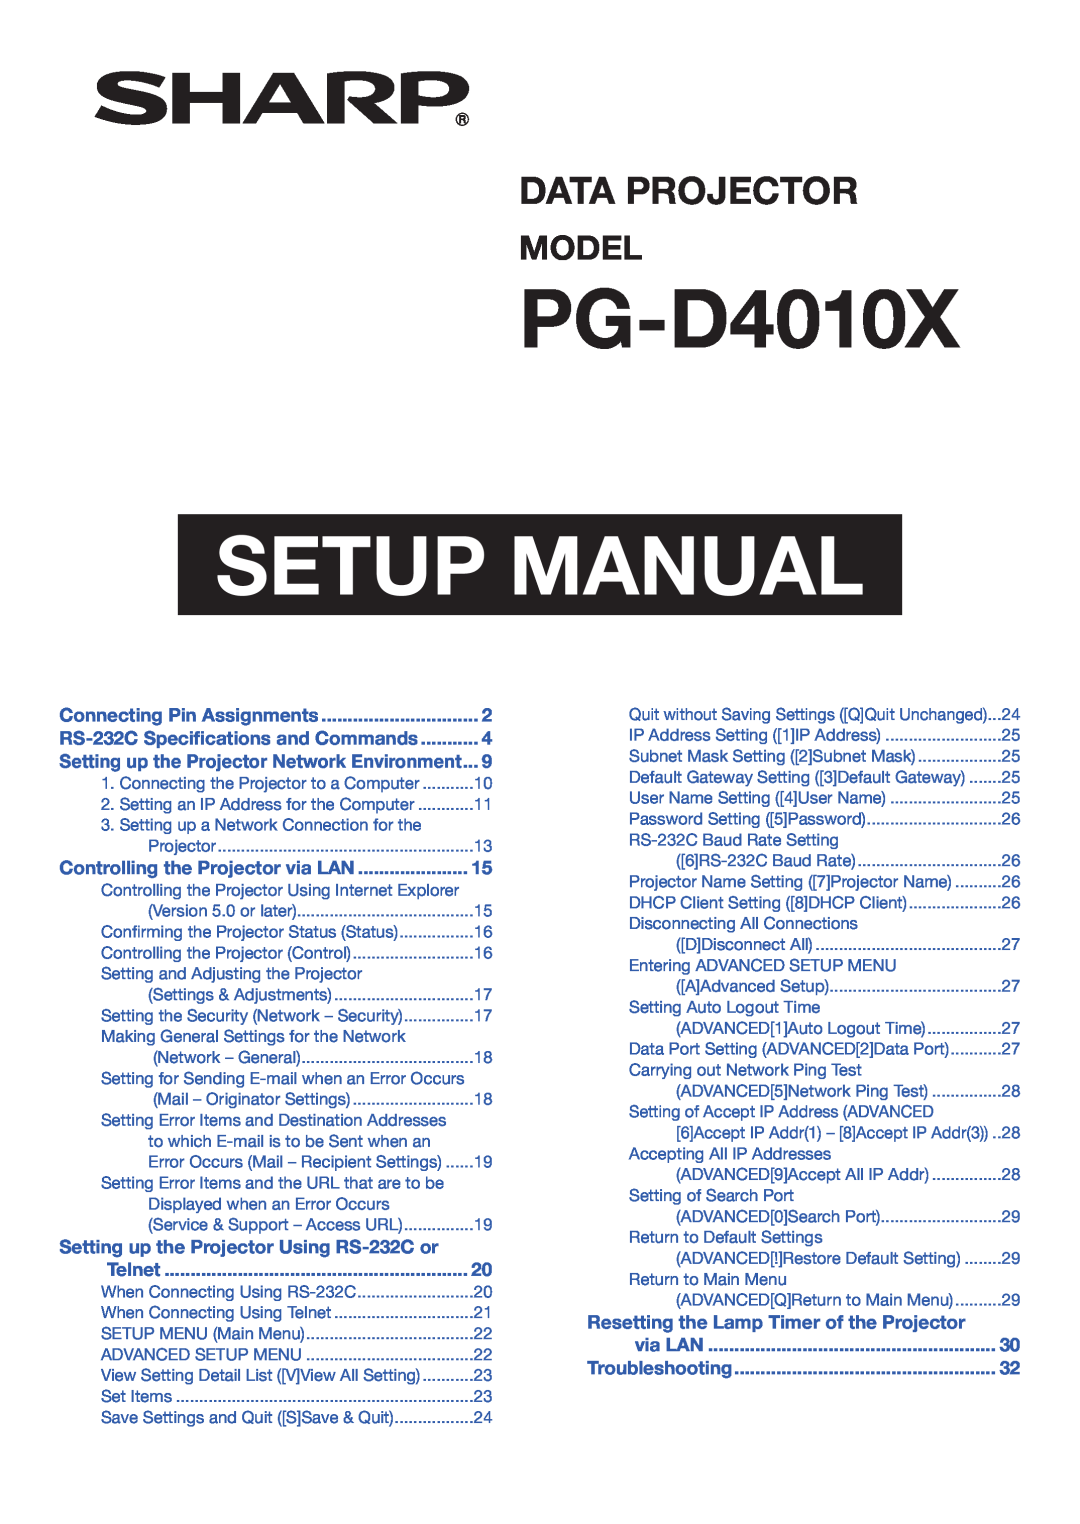 Sharp PG-D4010X specifications Setup Manual, Data Projector, Model, Connecting Pin Assignments, Telnet, via LAN 